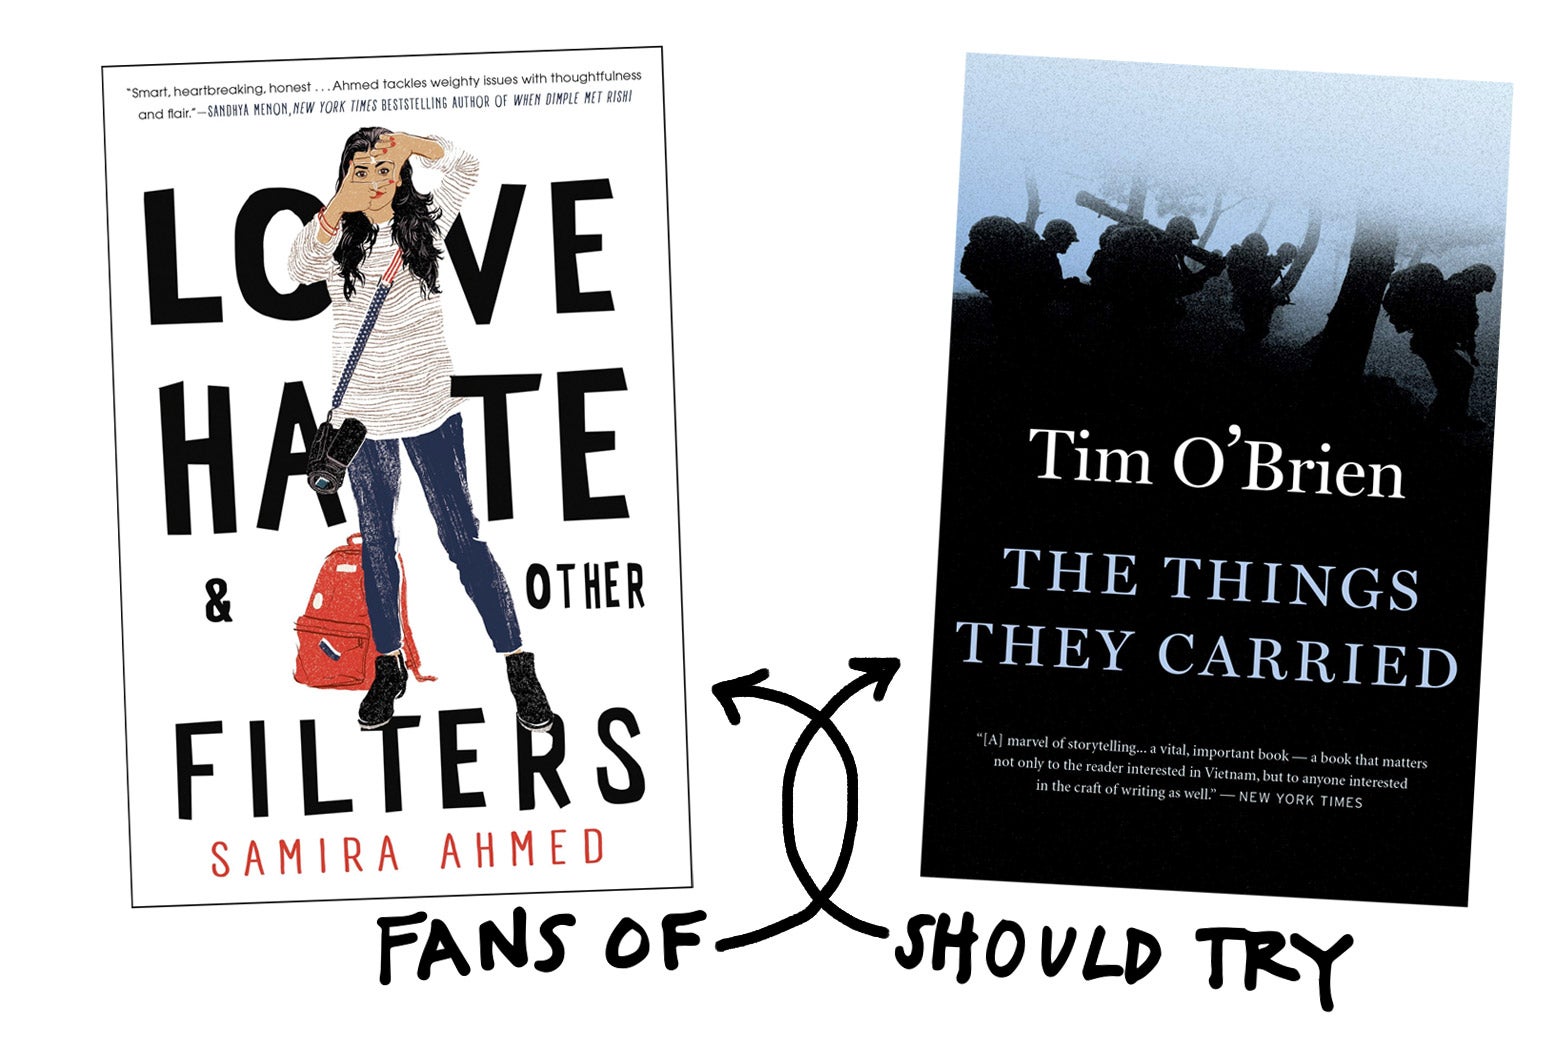 Fans of Love, Hate, and Other Filters should try The Things They Carried by Tim O'Brien.